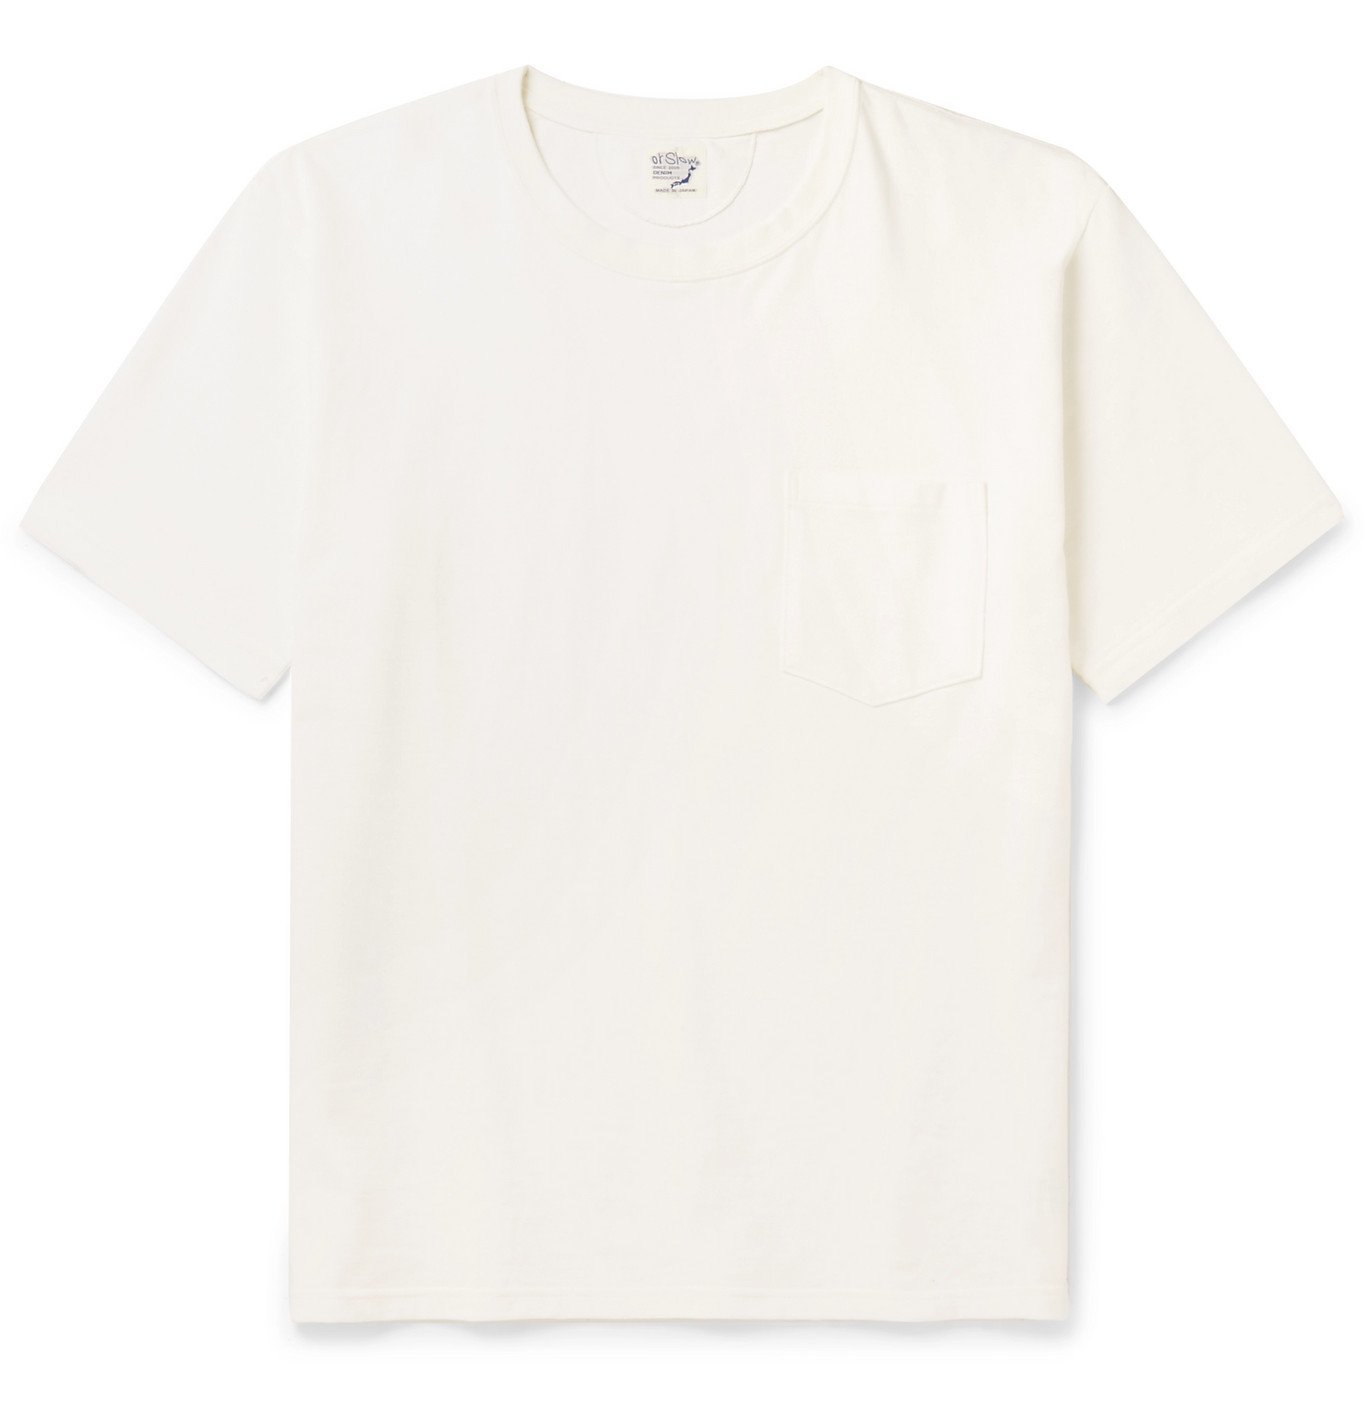 OrSlow - Oversized Embroidered Cotton-Jersey T-Shirt - White orSlow